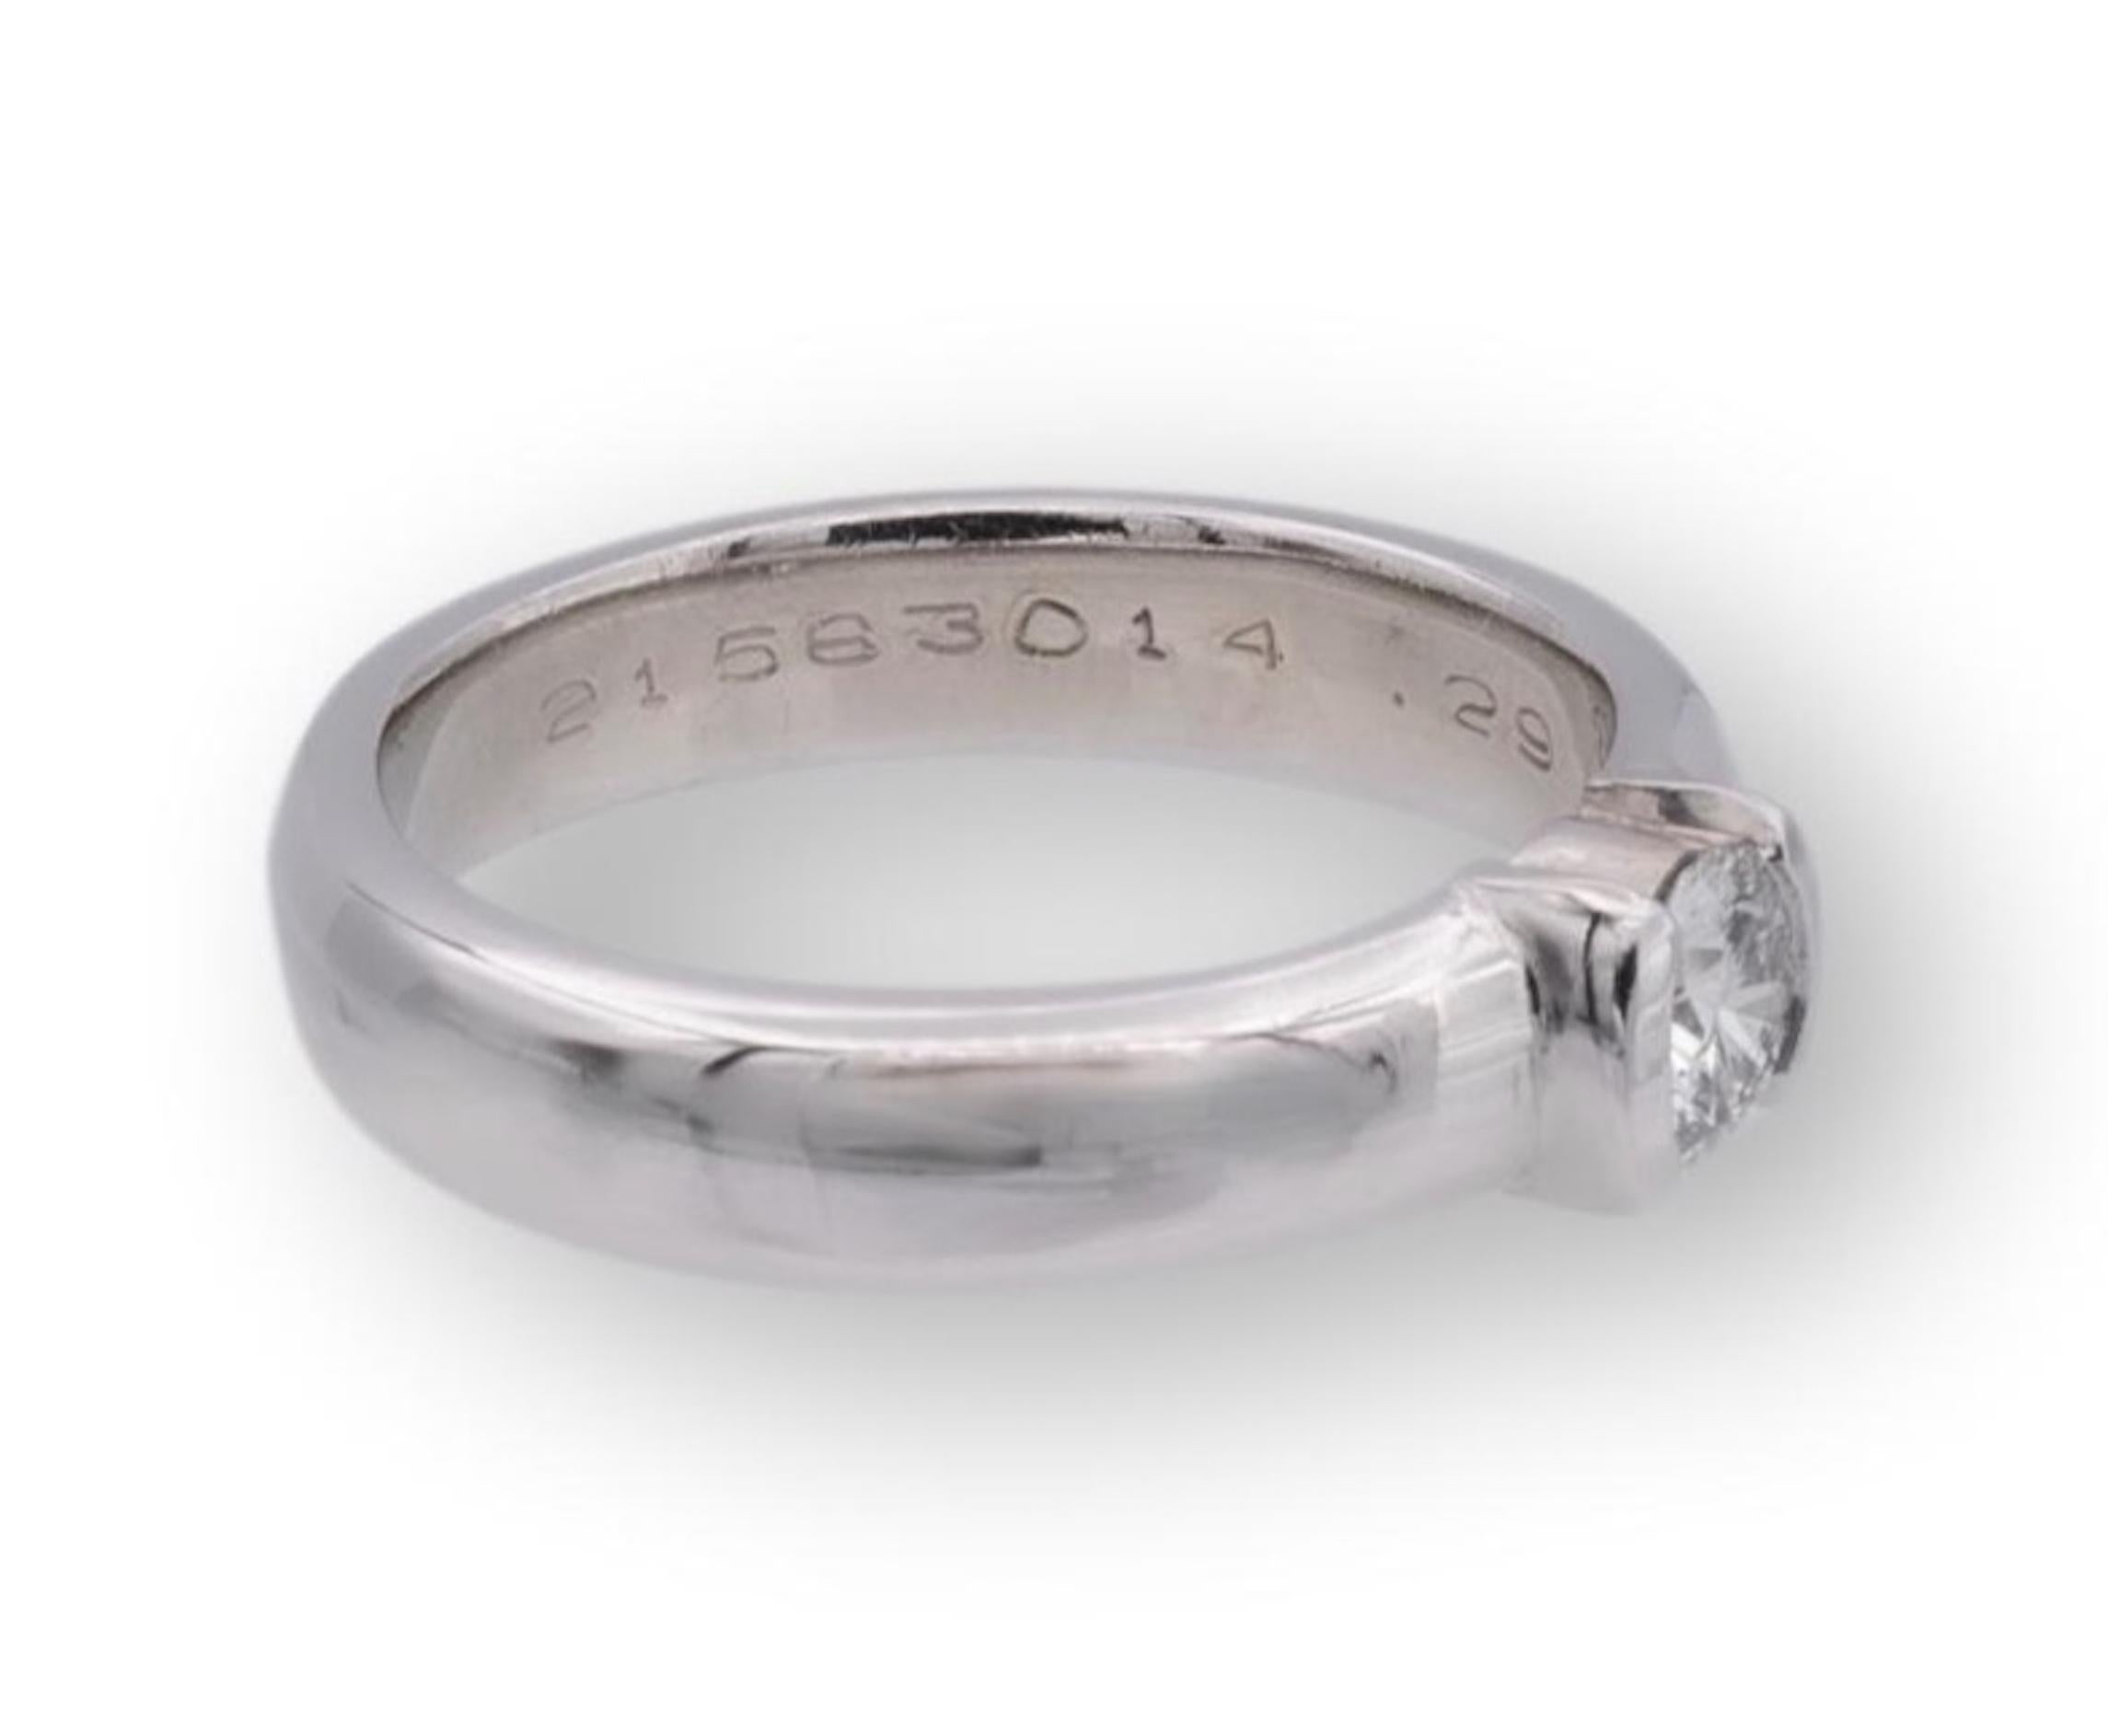 Tiffany and Co. engagement ring from the Etoile collection finely crafted in platinum featuring a round brilliant cut diamond center weighing 0.29 cts. G-H color , VVS1-VVS2 clarity set in a half bezel setting. The original Tiffany certificate for